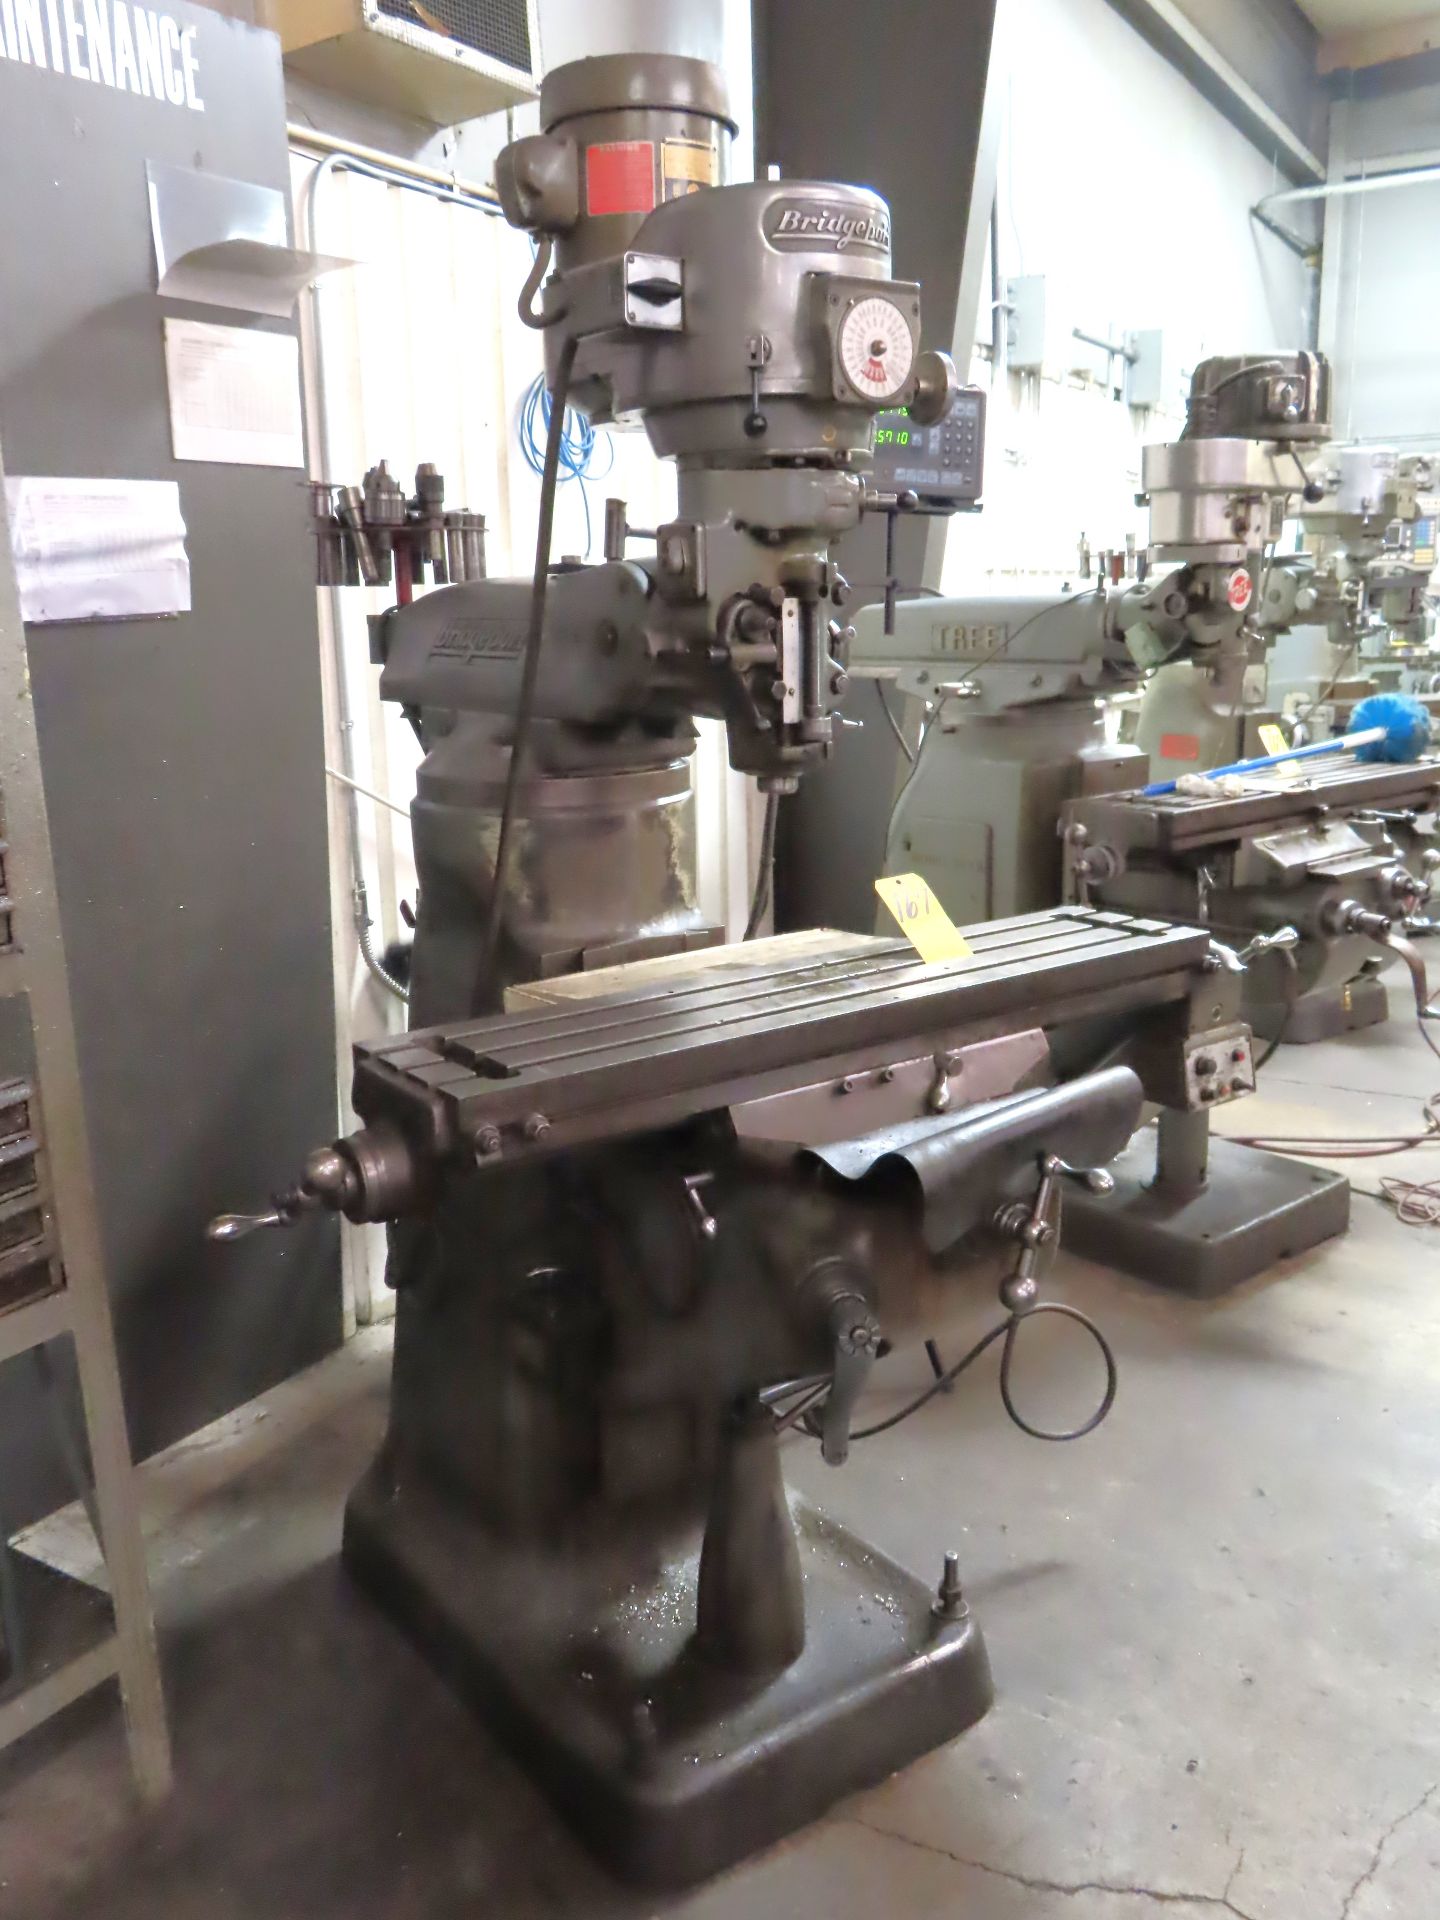 BRIDGEPORT VERT. MILL, 1.5 HP, S/N 179481, V.S., MITUTOYO 2-AXIS DRO, 9" X 42" TABLE, ONE SHOT LUBE - Image 2 of 2